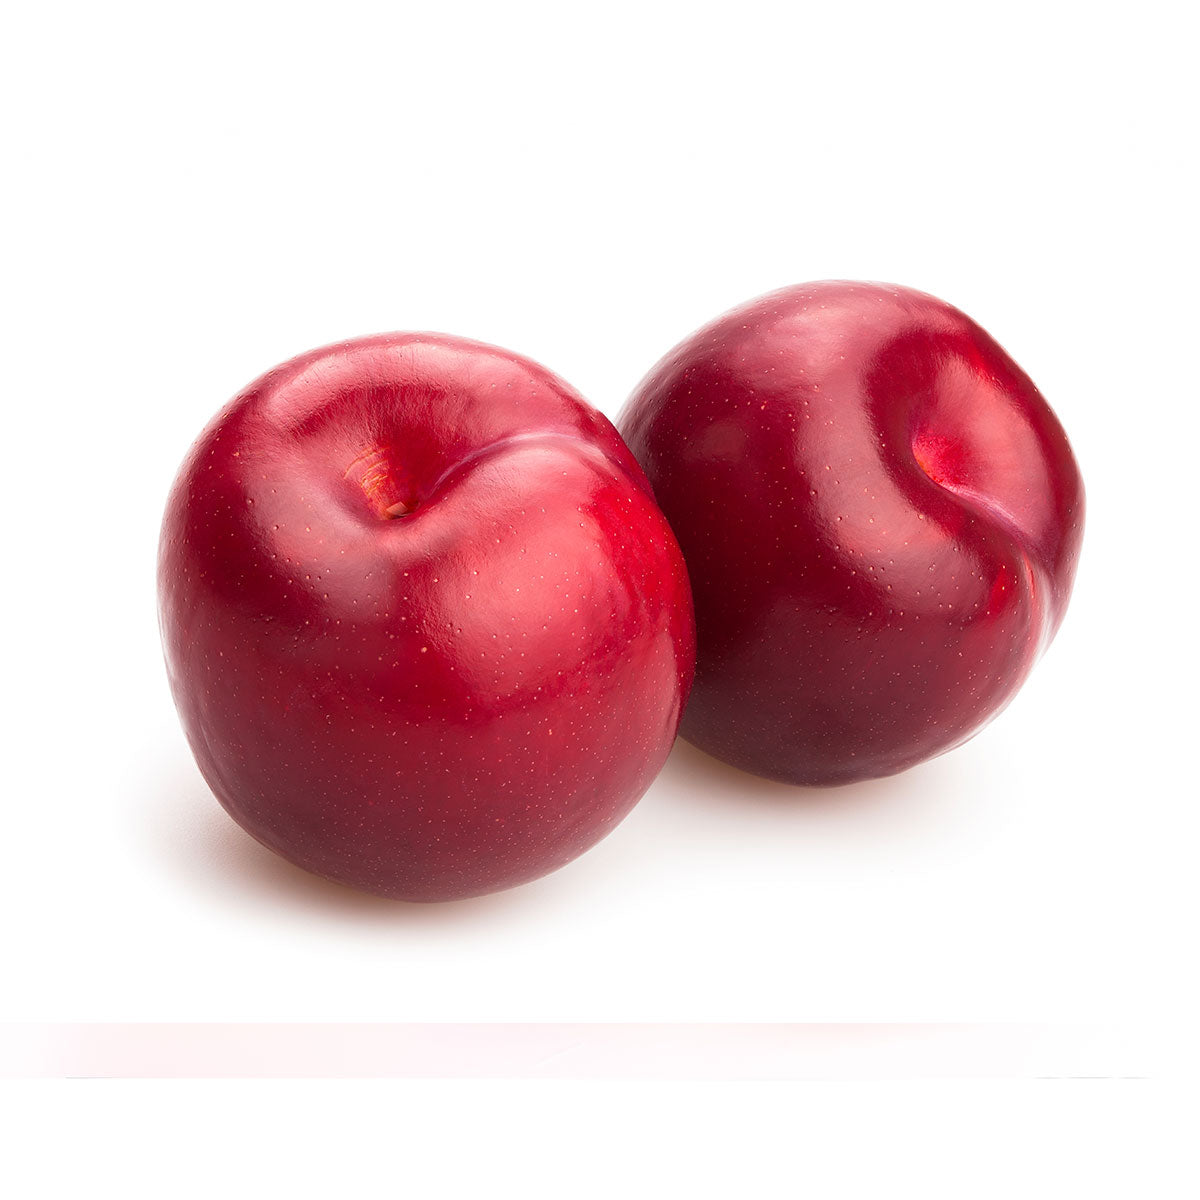 RED LARGE PLUMS